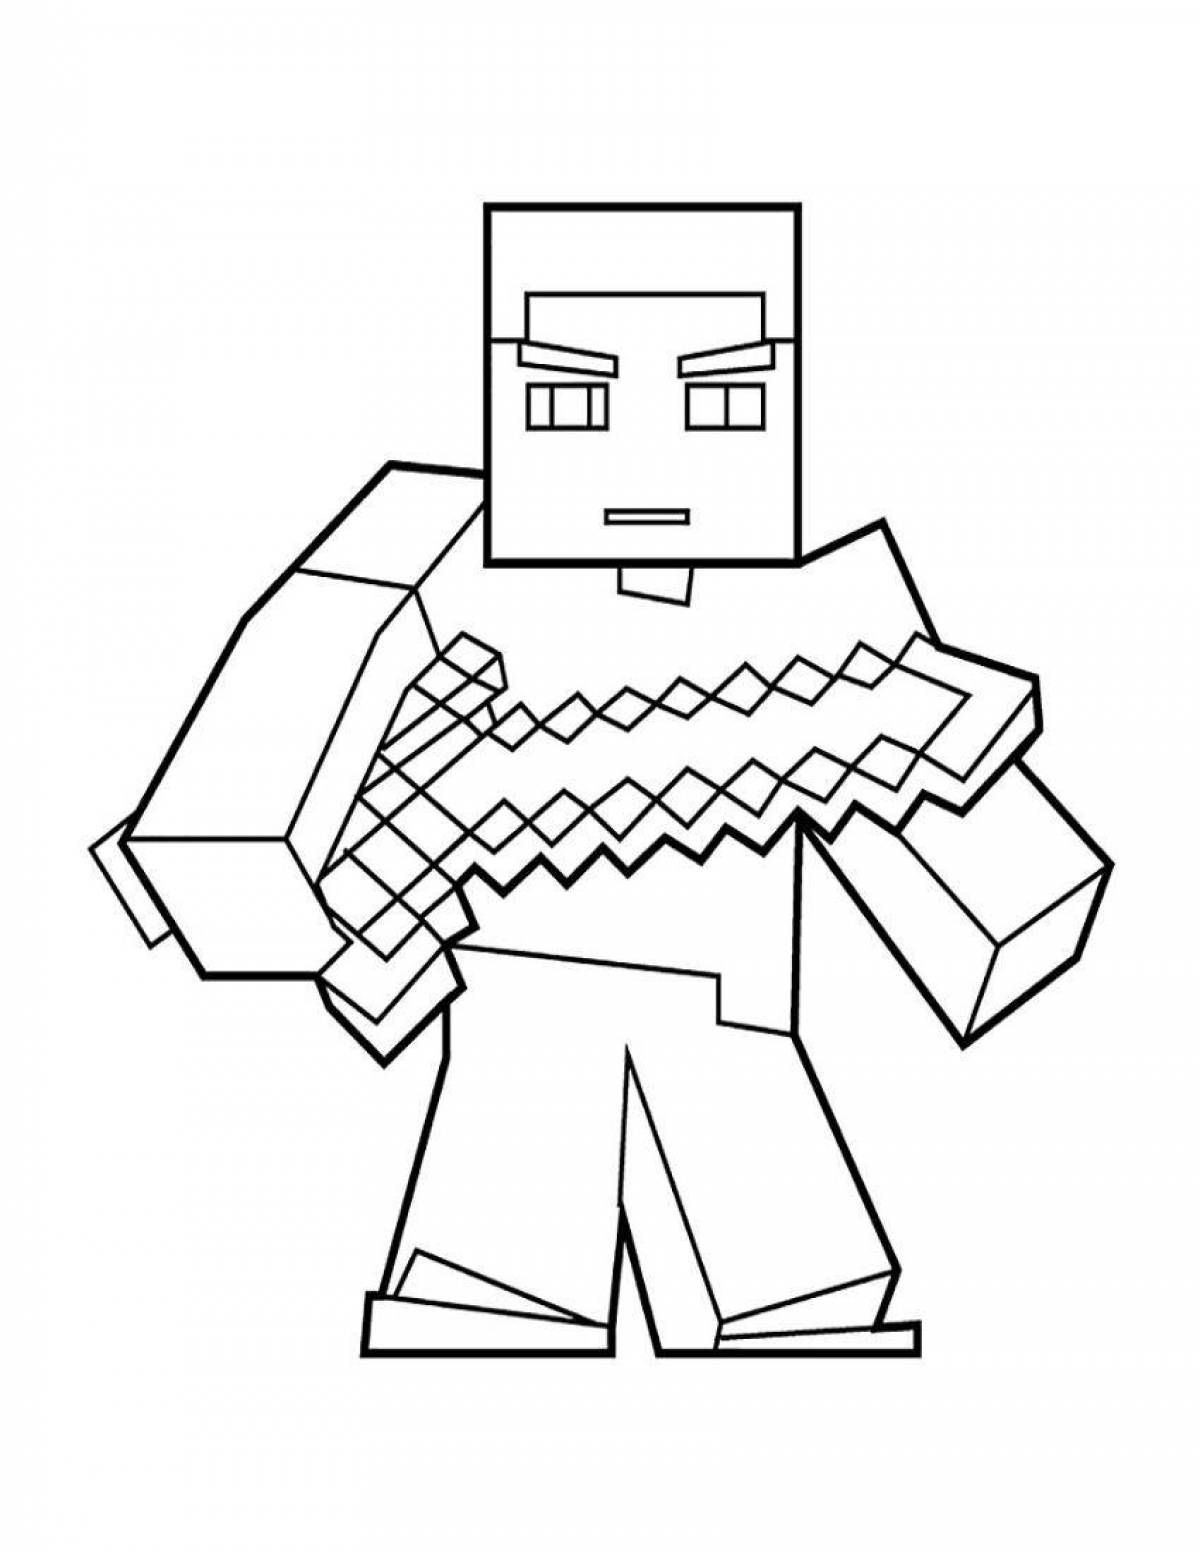 Fun coloring for boys 10 years old minecraft